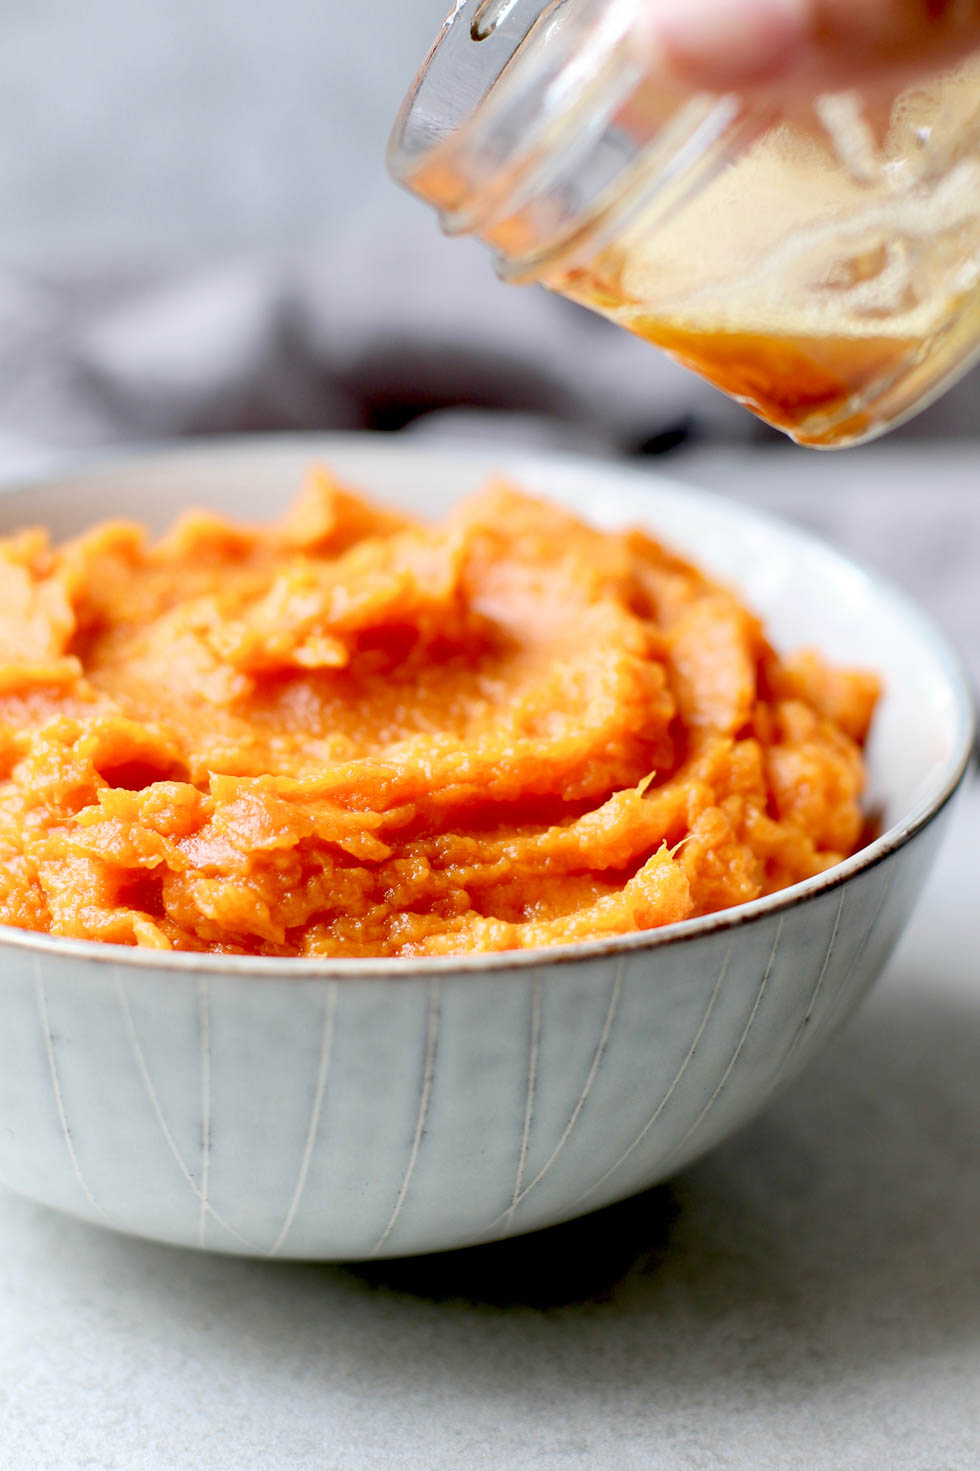 Make Brown Butter Whipped Sweet Potatoes